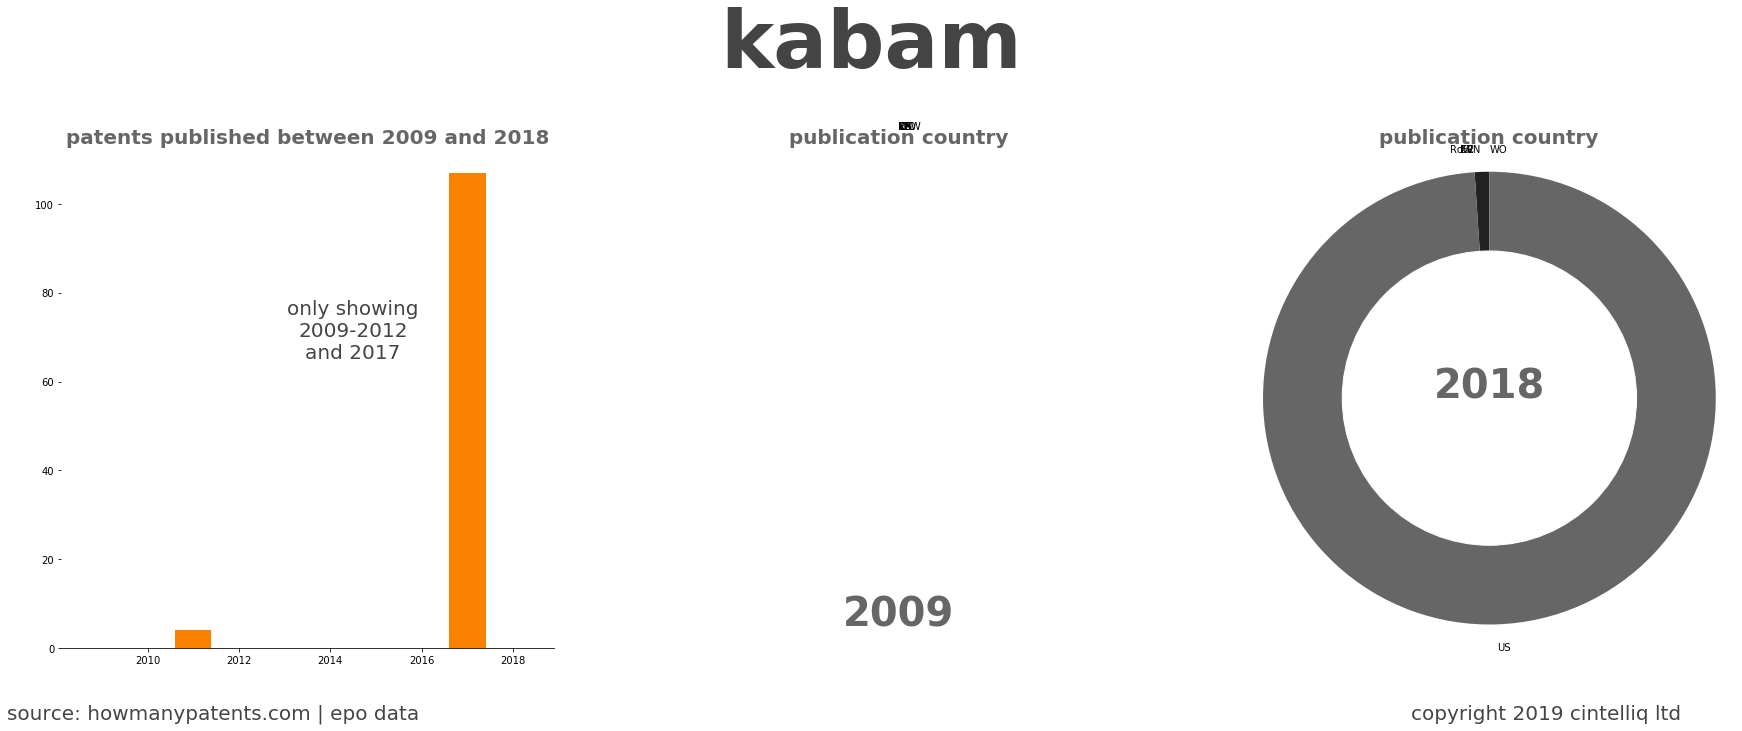 summary of patents for Kabam